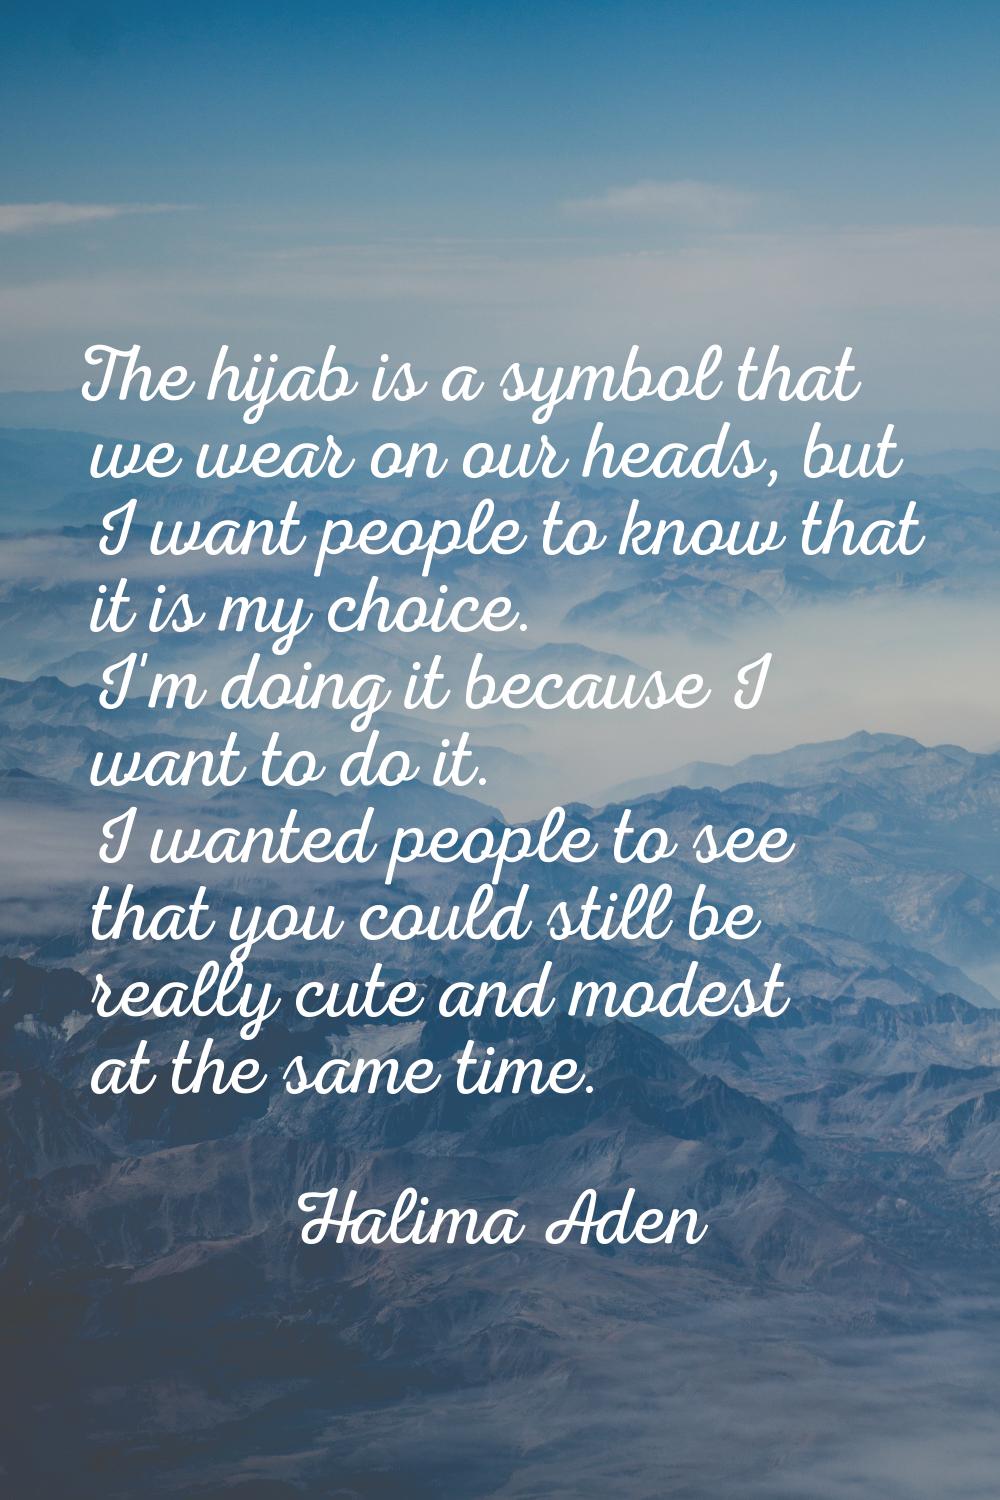 The hijab is a symbol that we wear on our heads, but I want people to know that it is my choice. I'